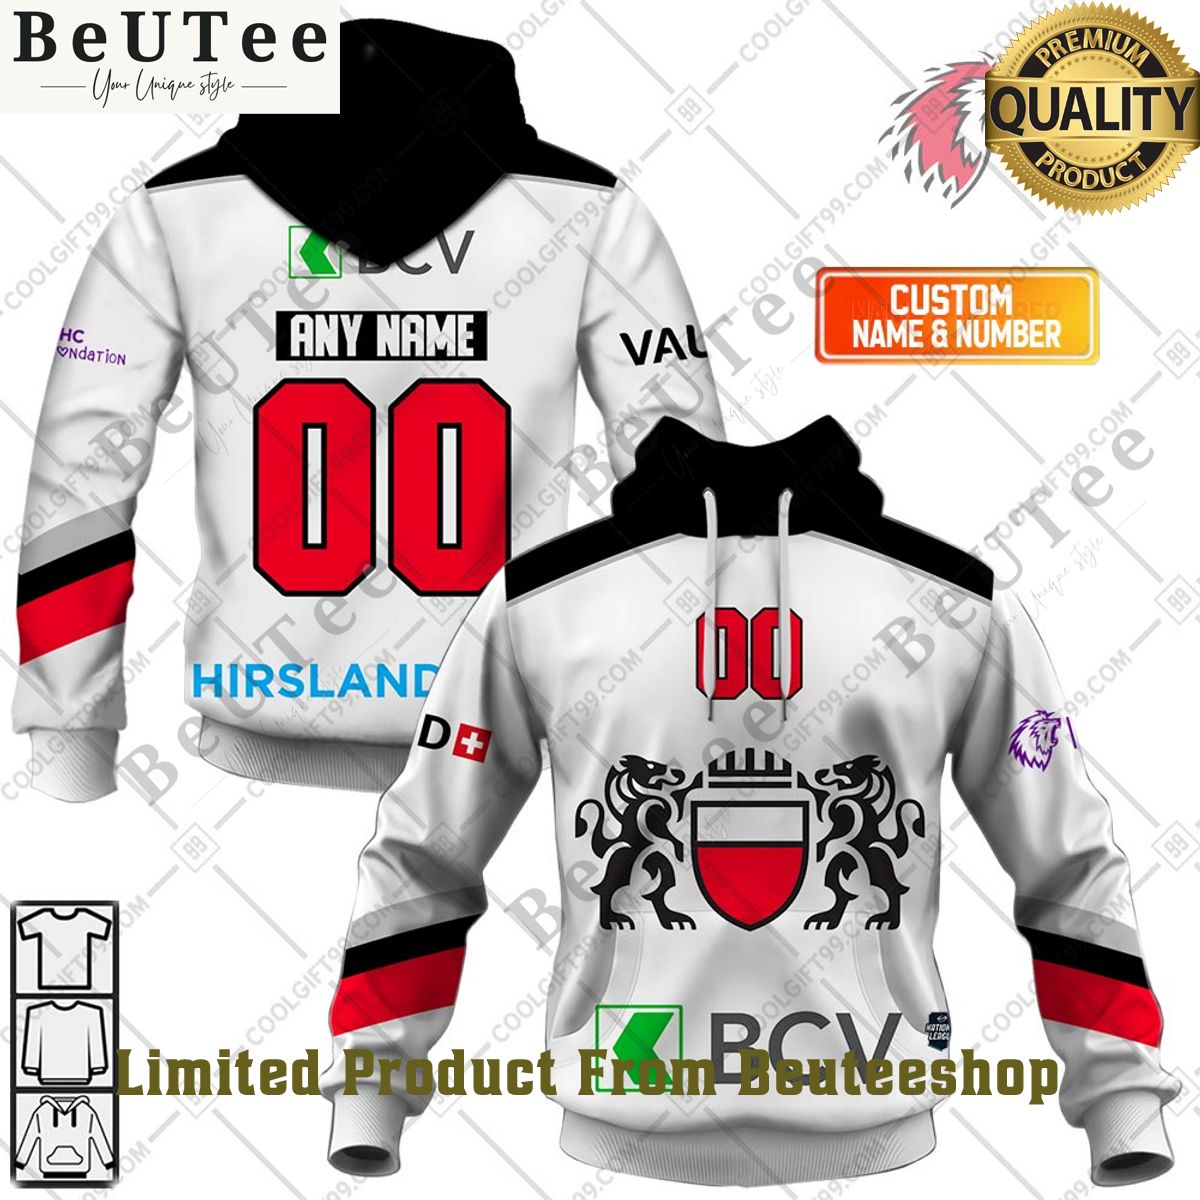 personalized name and number nl hockey lausanne hc away jersey style printed hoodie shirt 1 Jvgni.jpg